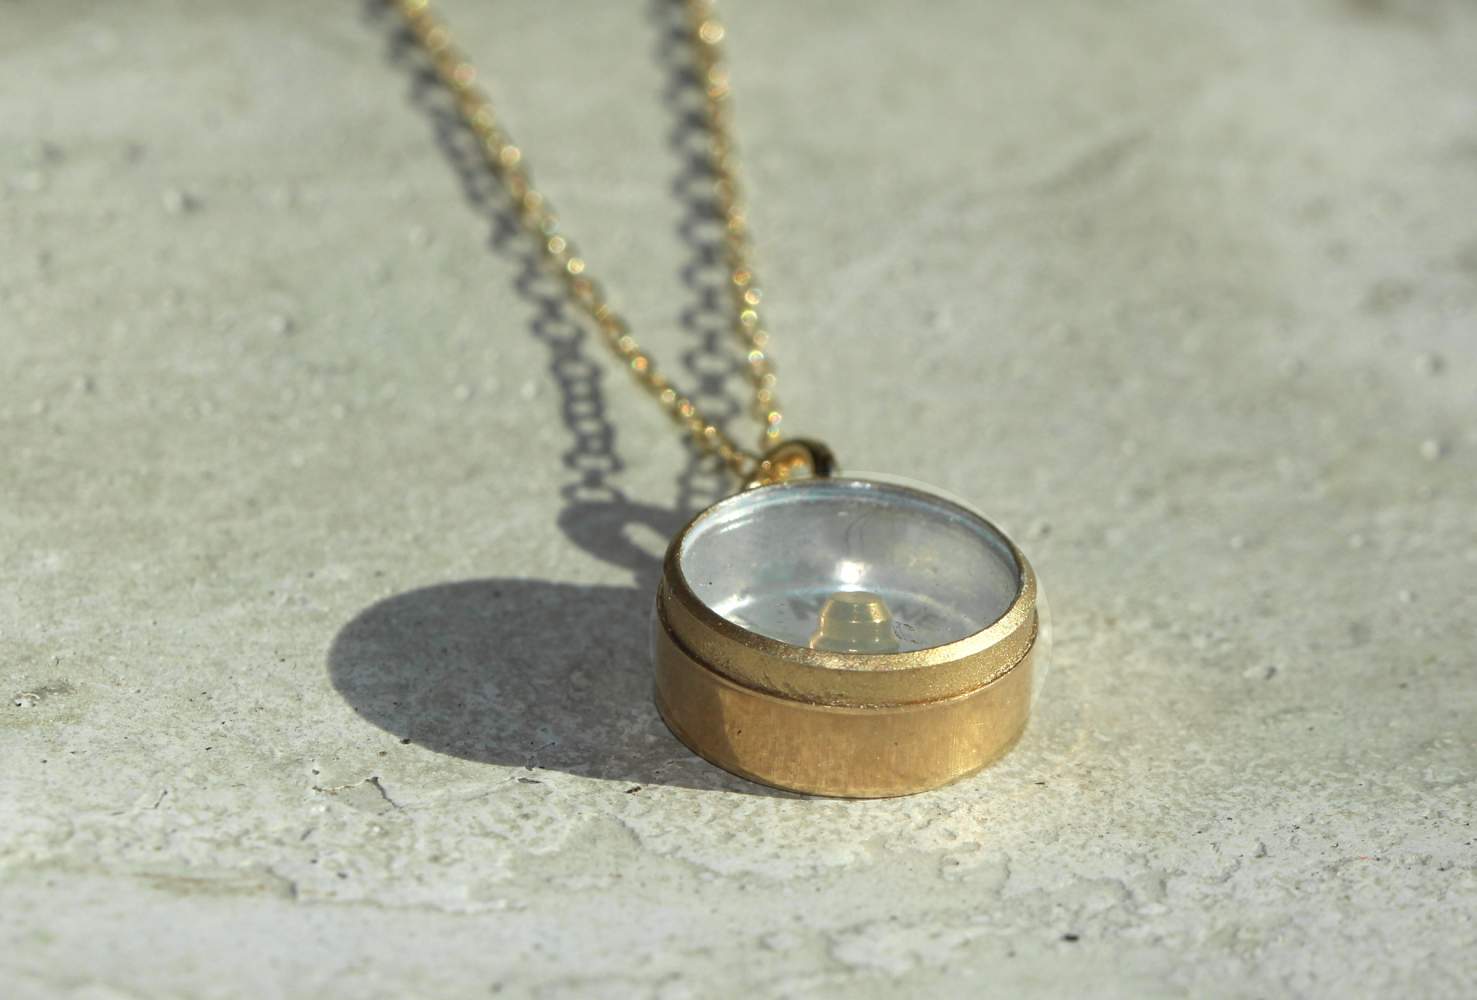 Dainty gold working compass necklace. 18k gold vermeil